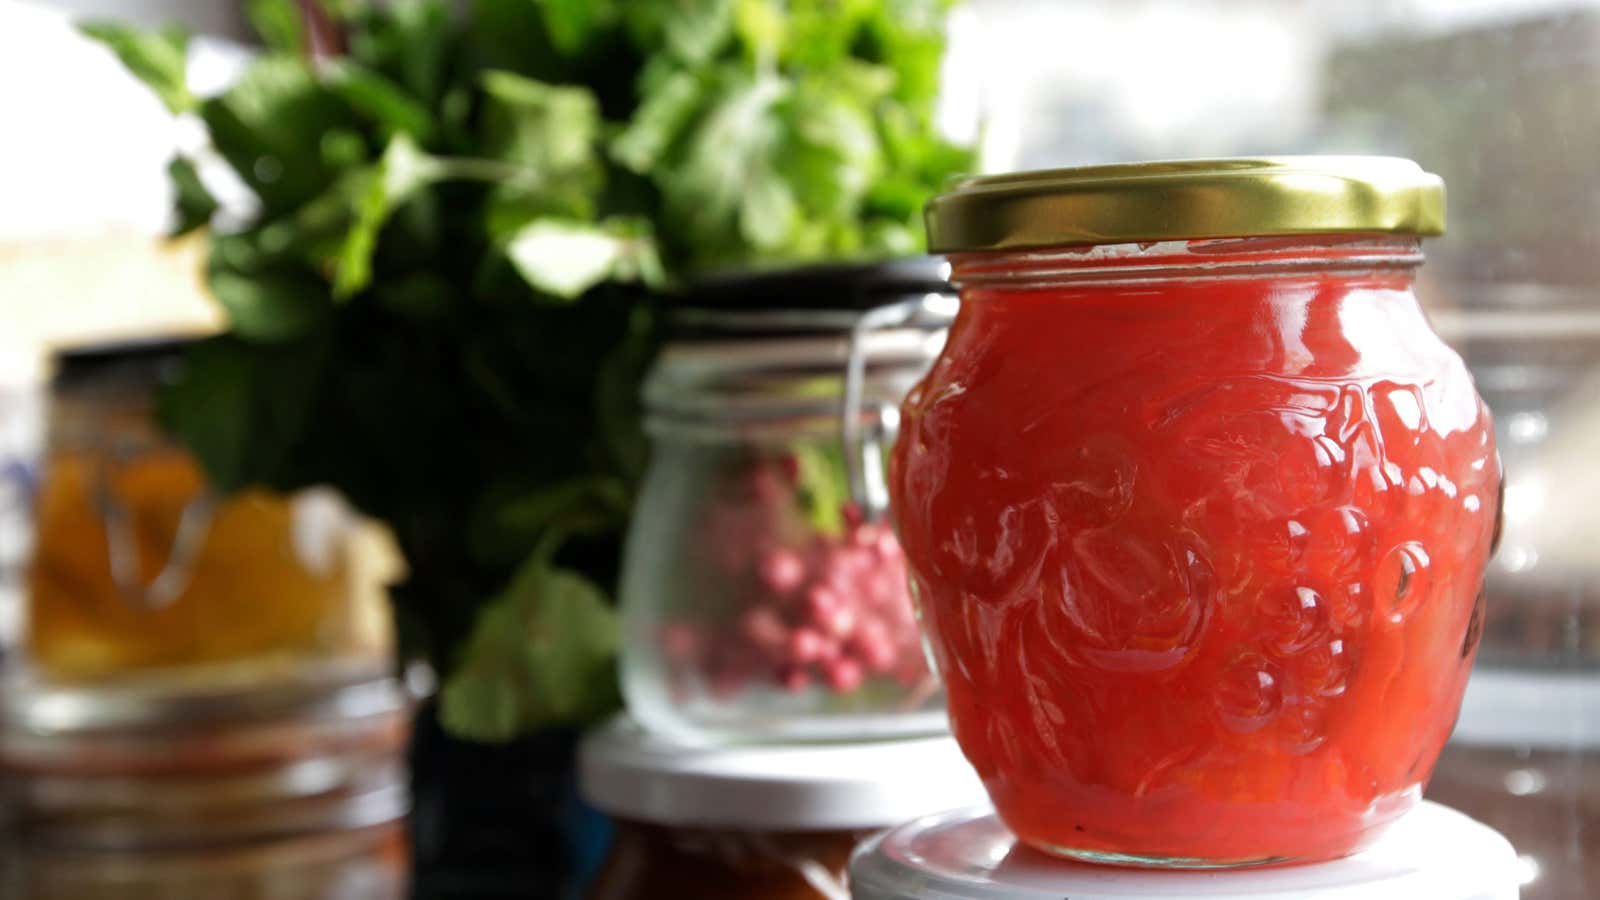 Its rosy hue and spring arrival make rhubarb a real winner in jams, tarts, and even cocktails.